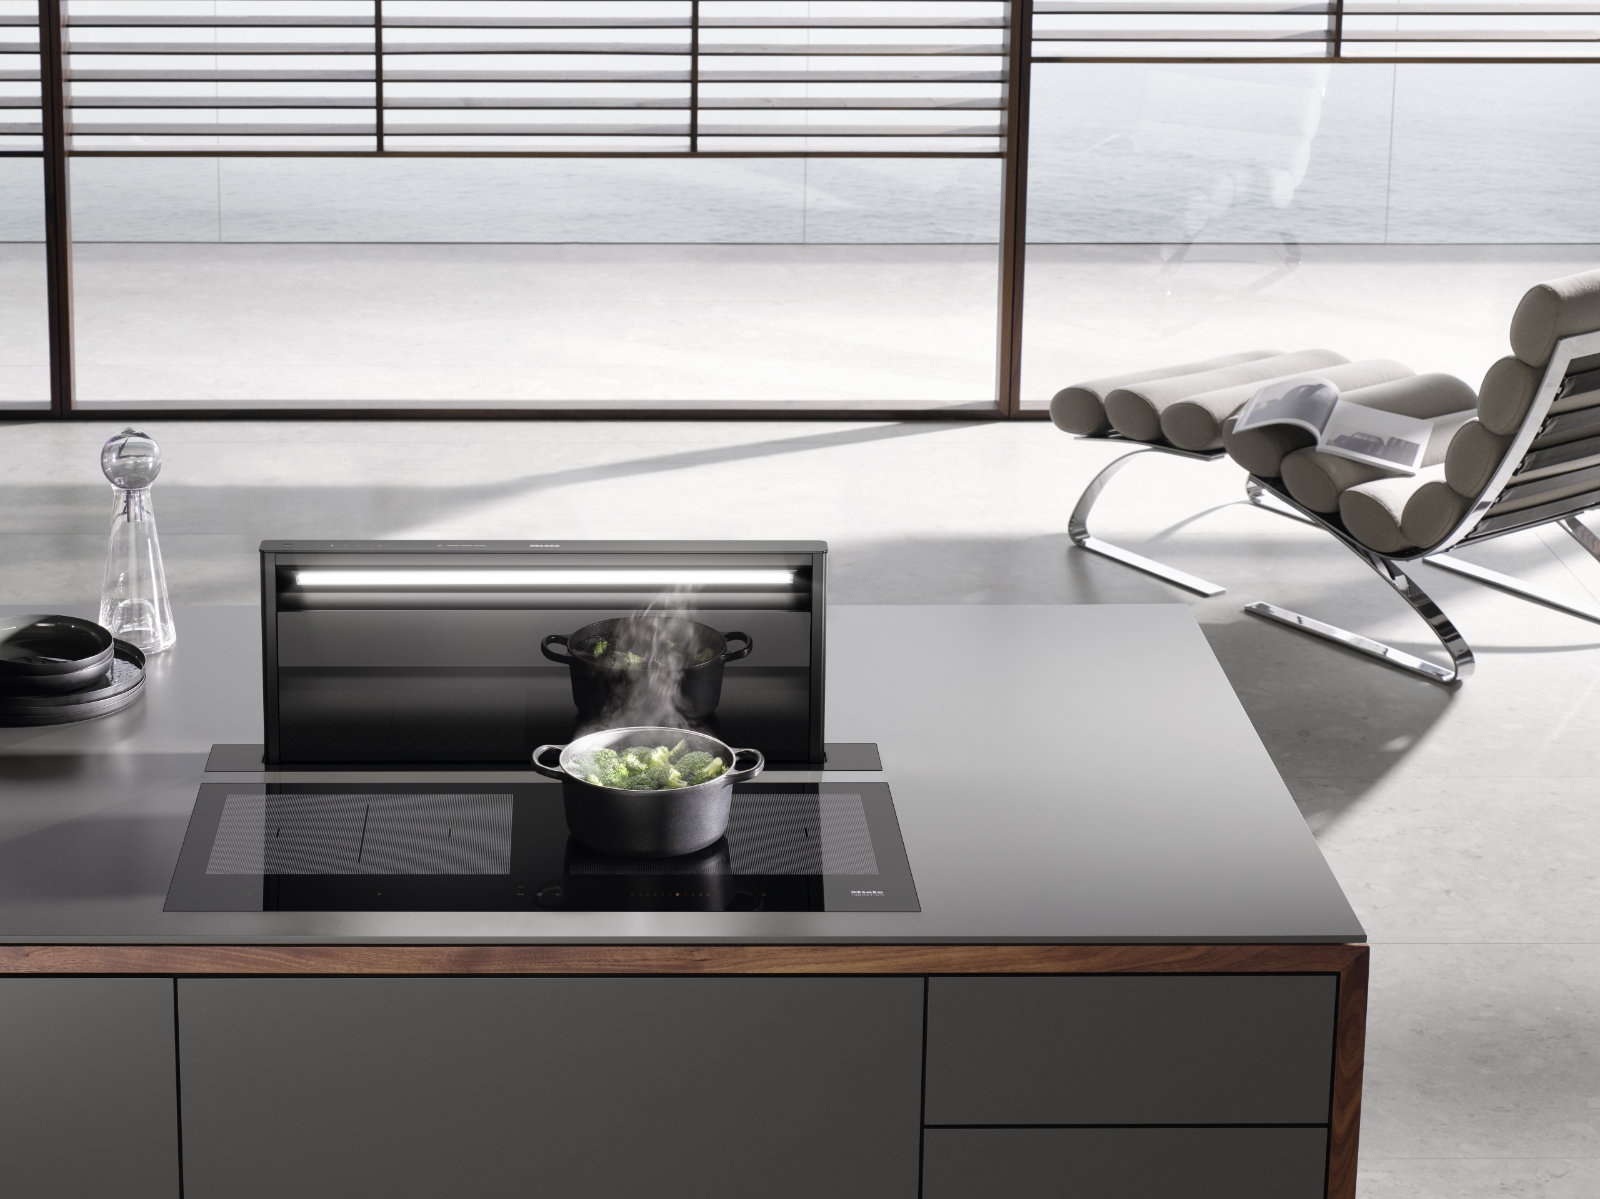 Miele Downdraft recessible hood for maximum space efficiency